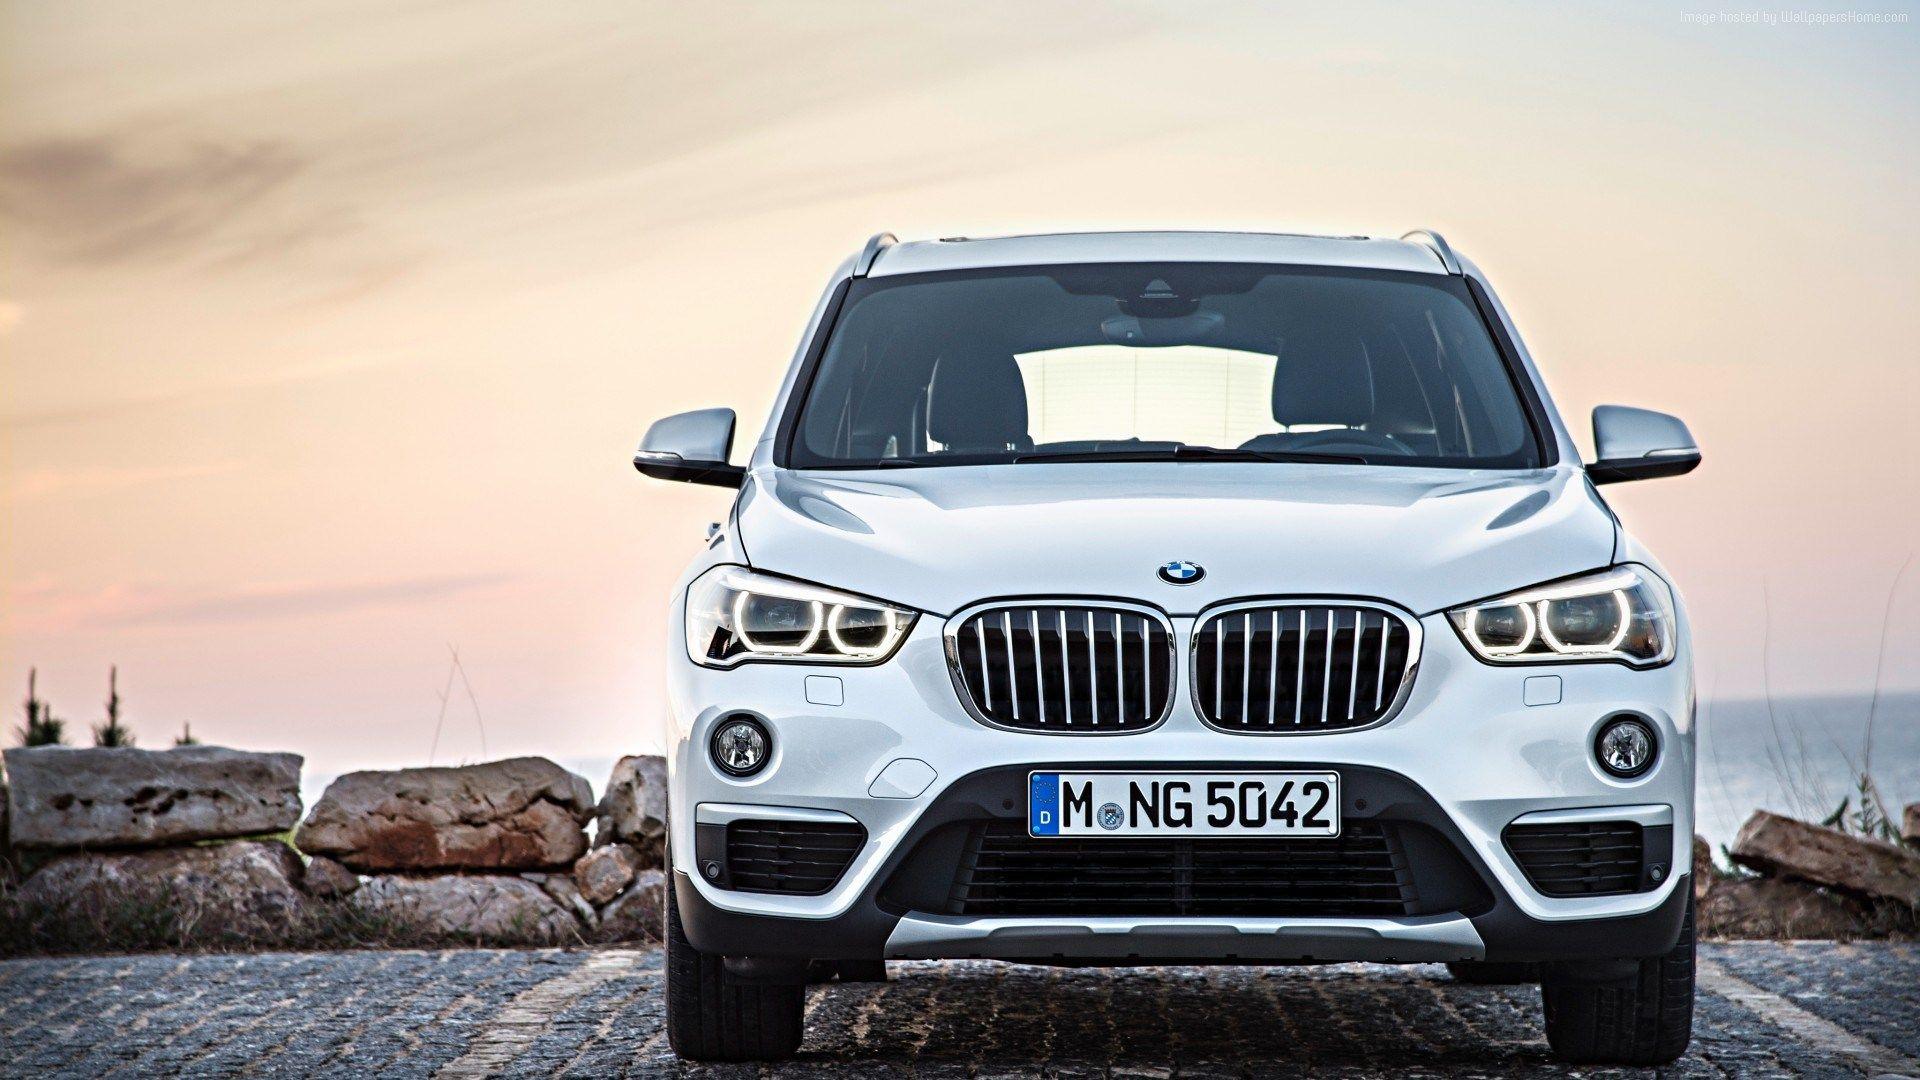 Wallpaper Blink of BMW X1 Wallpaper HD for Android, Windows